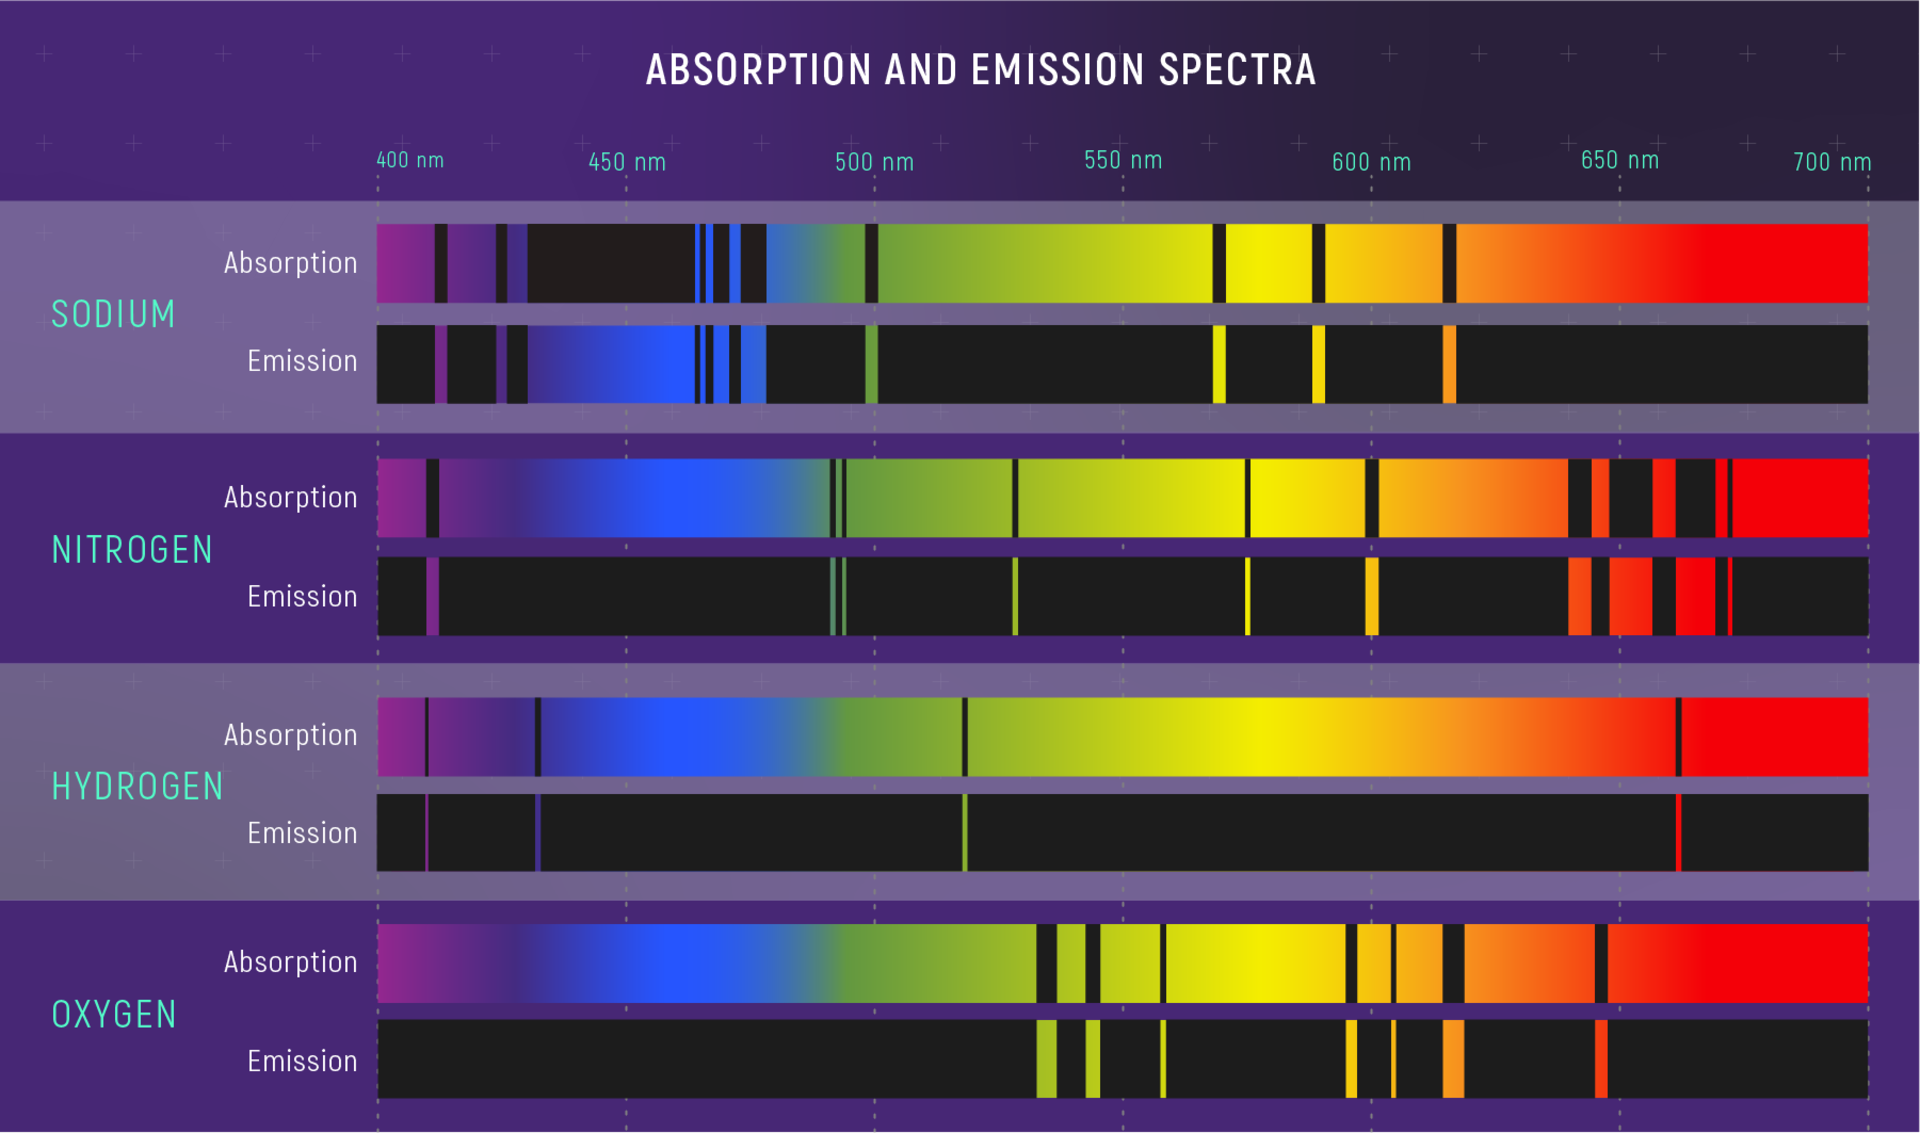 ESA - Absorption and emission spectra of various elements